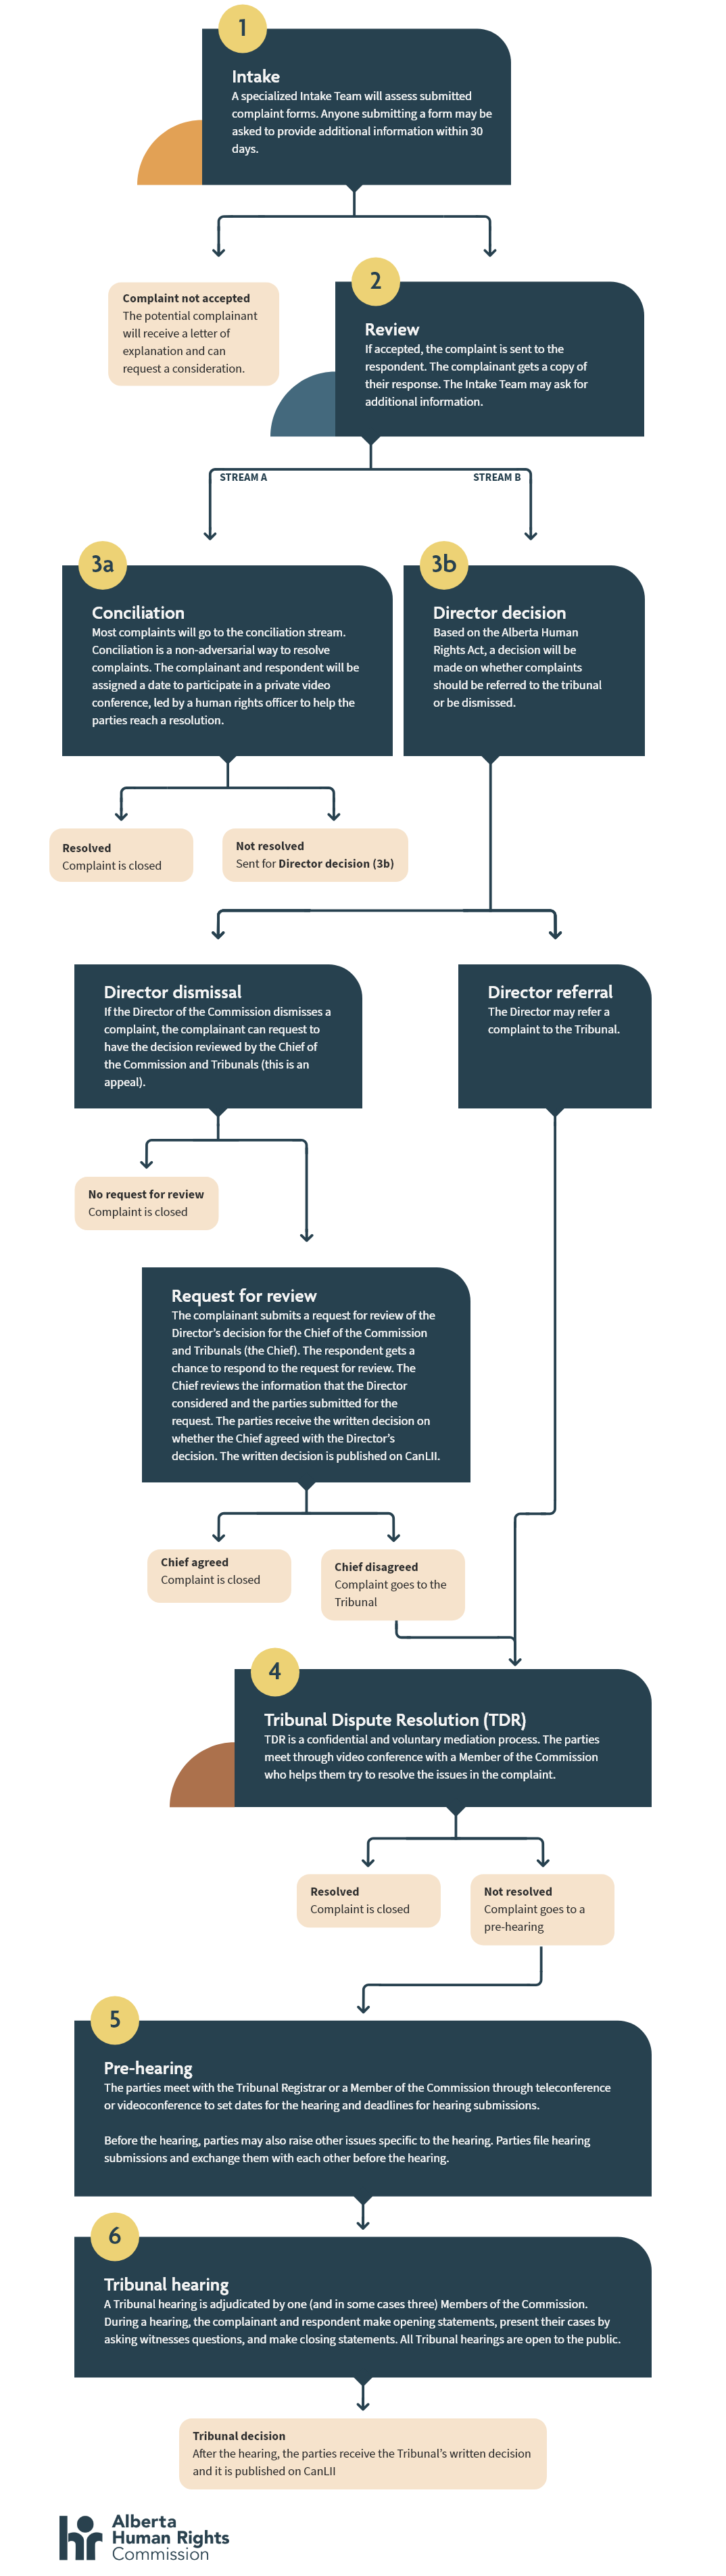 Complaint process infographic showing the six step workflow as described in the text version.